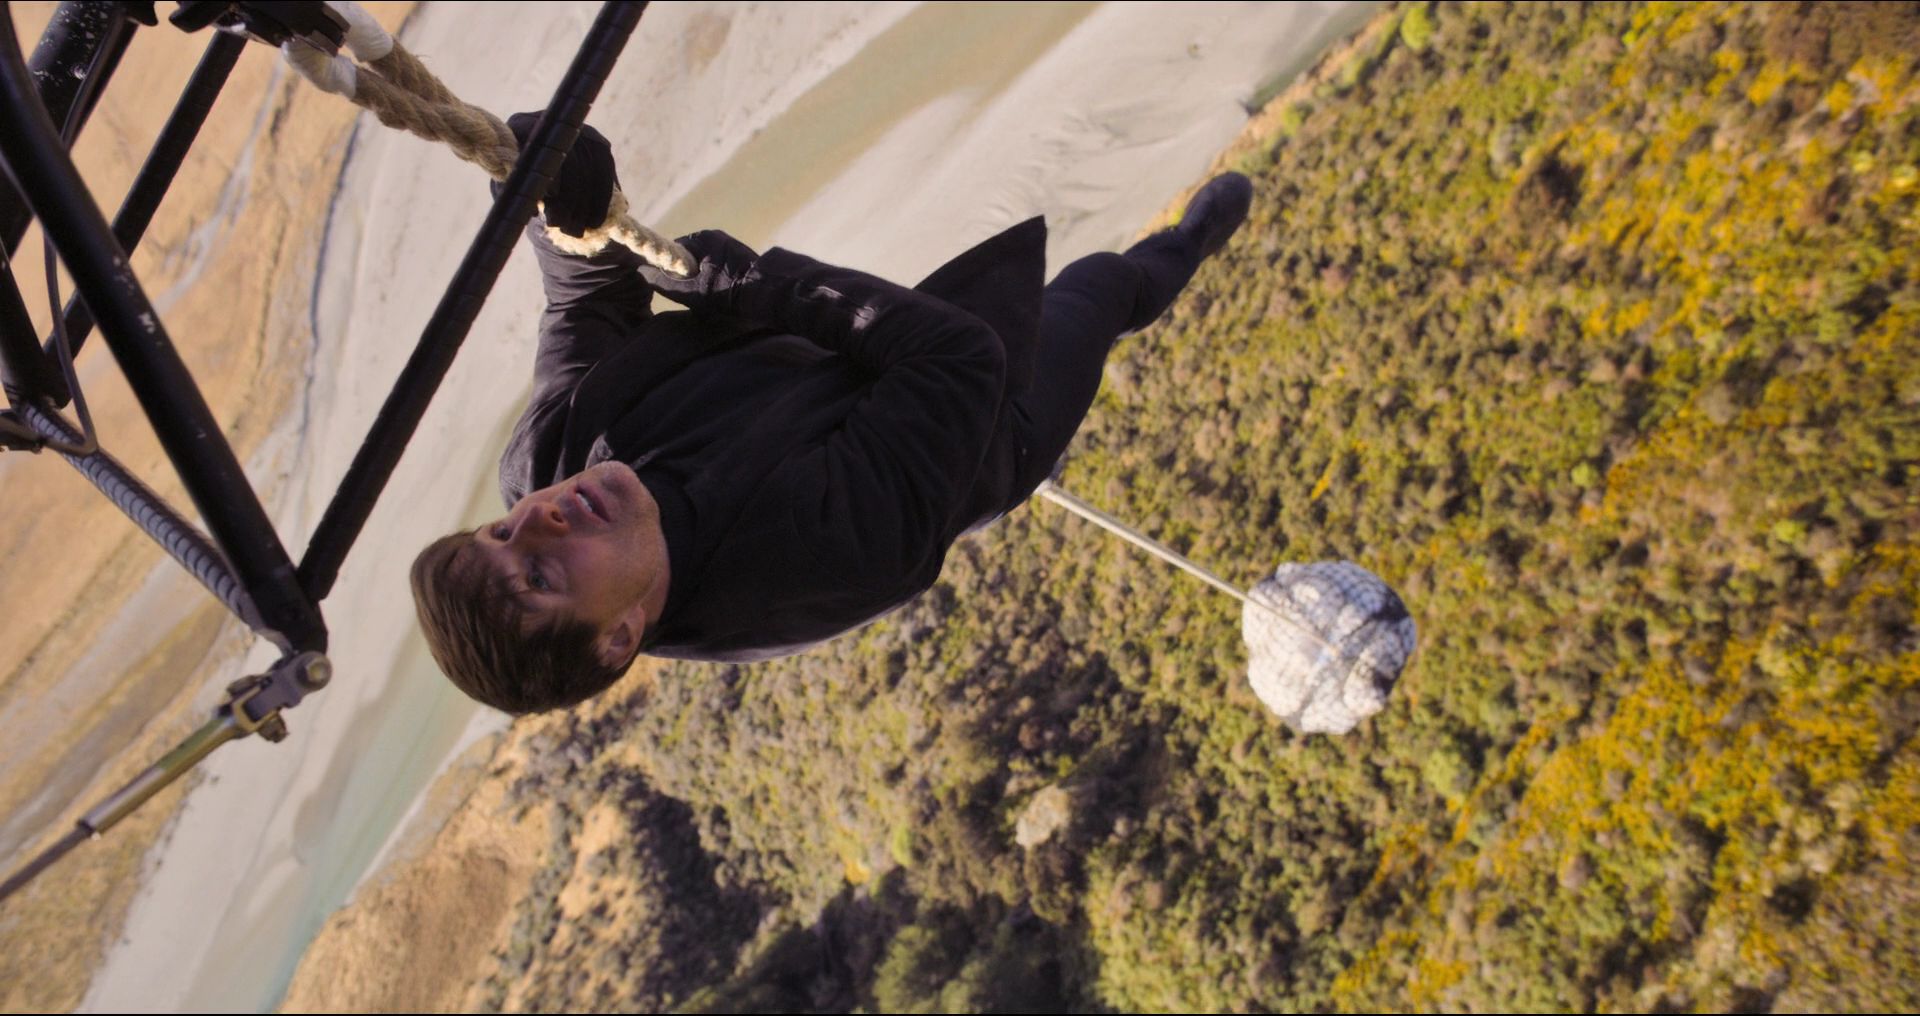 Mission-Impossible-Fallout-3273.jpg